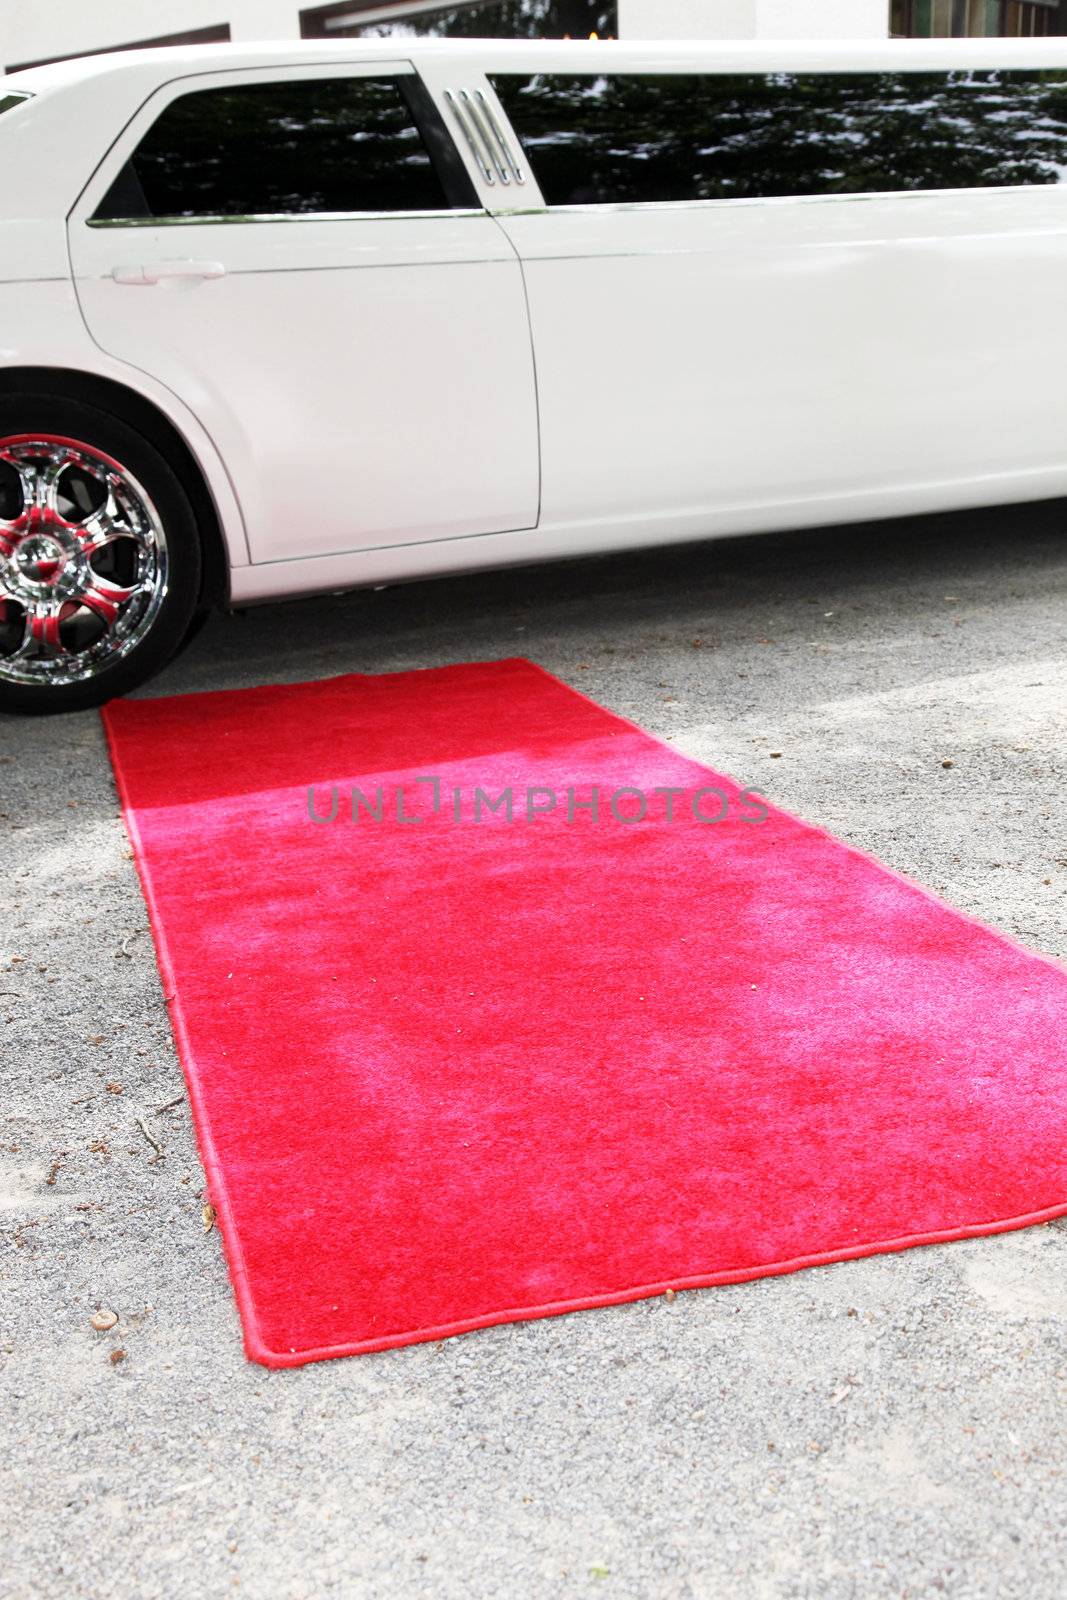 White stretch limousine and empty red carpet for those VIP guests or a prestige luxury function or celebration Limousine and empty red carpet for those VIP guests or a prestige luxury function 